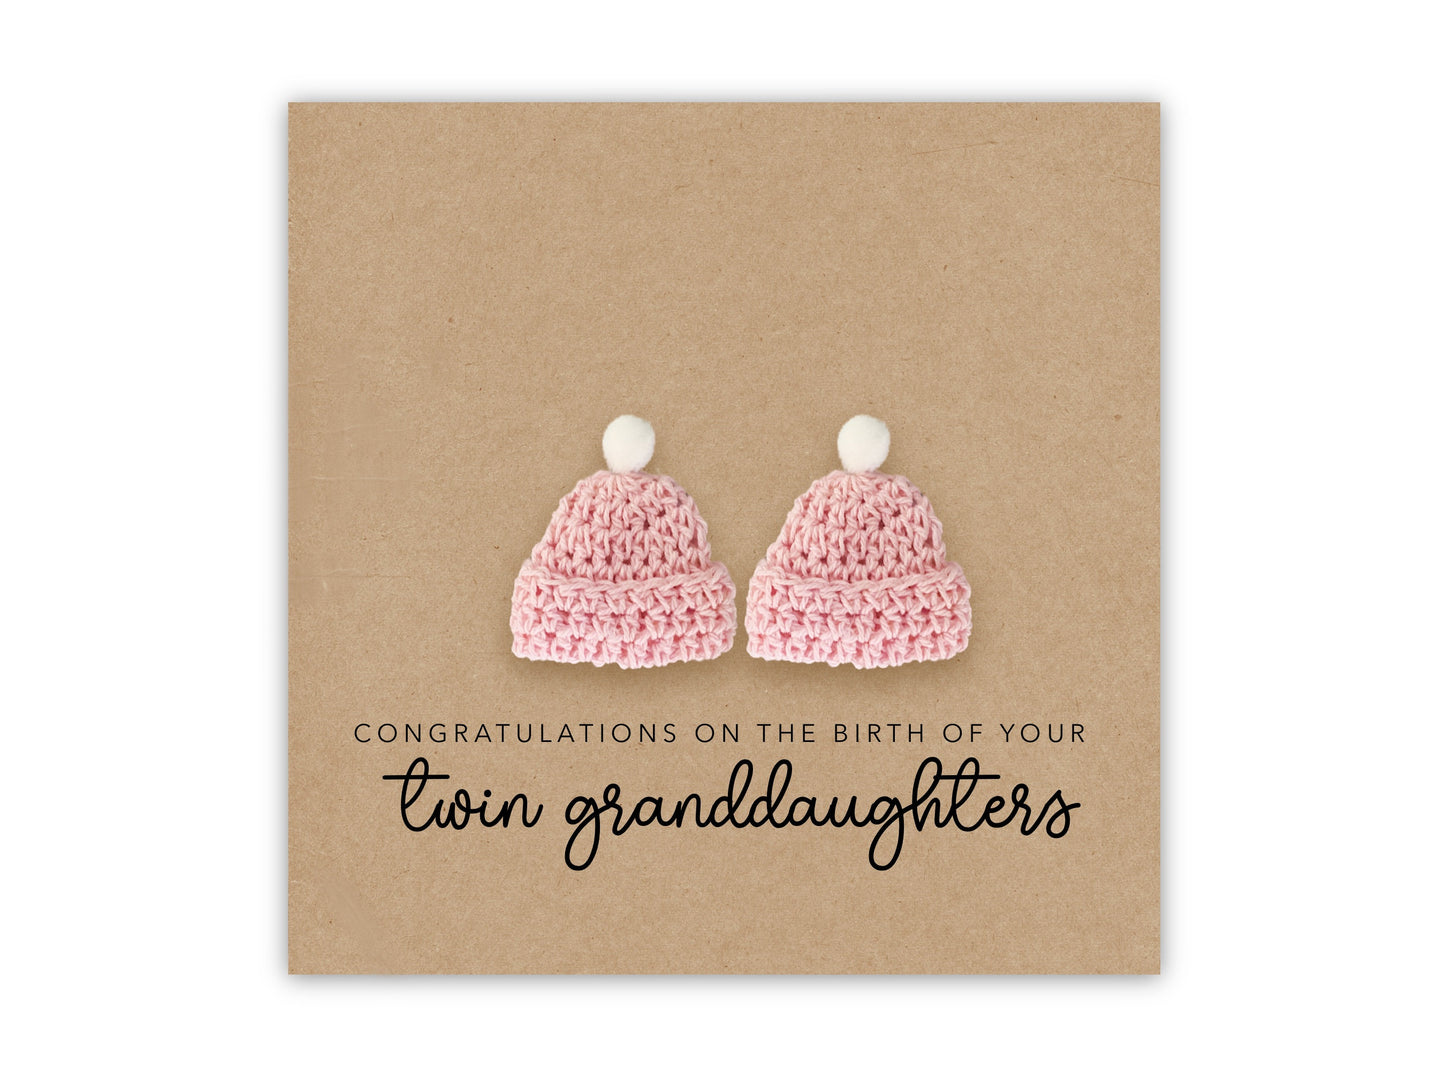 Congratulations Card For A Grandparent, Congratulations On The Birth On Your Twin Granddaughter, New Baby Card, Twin Granddaughter Card